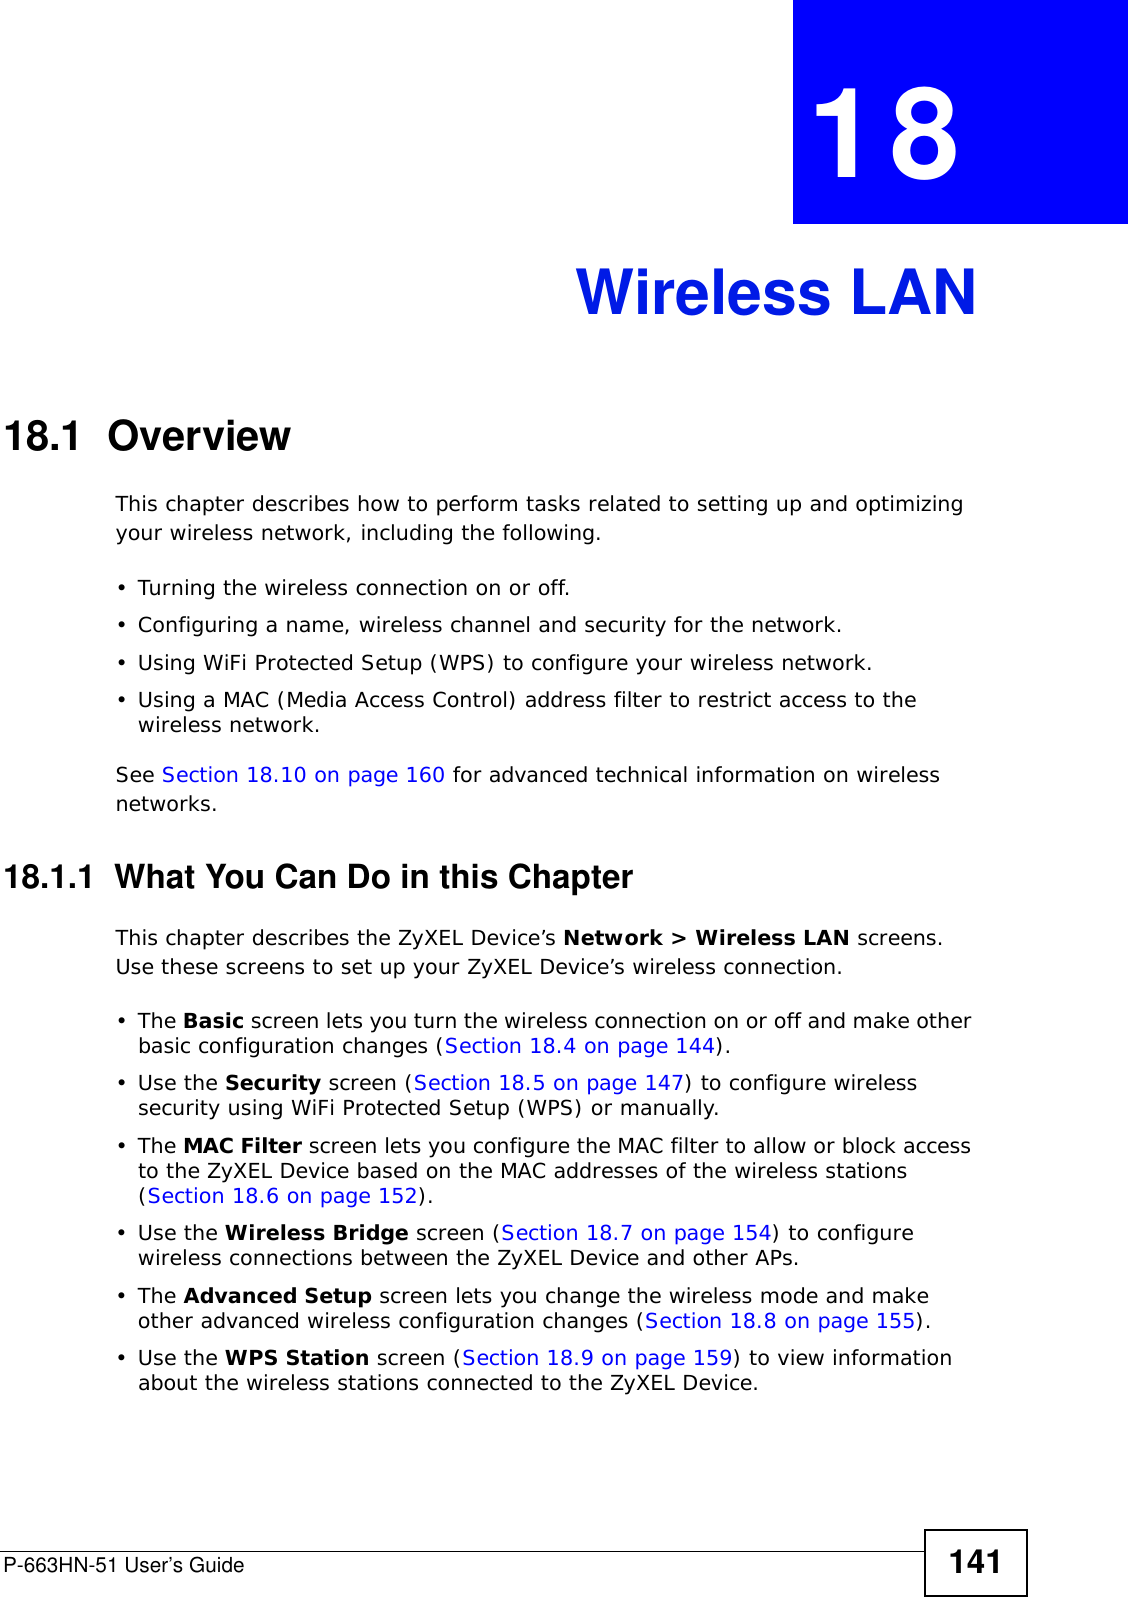 P-663HN-51 User’s Guide 141CHAPTER  18 Wireless LAN18.1  Overview This chapter describes how to perform tasks related to setting up and optimizing your wireless network, including the following.• Turning the wireless connection on or off.• Configuring a name, wireless channel and security for the network.• Using WiFi Protected Setup (WPS) to configure your wireless network.• Using a MAC (Media Access Control) address filter to restrict access to the wireless network.See Section 18.10 on page 160 for advanced technical information on wireless networks.18.1.1  What You Can Do in this ChapterThis chapter describes the ZyXEL Device’s Network &gt; Wireless LAN screens. Use these screens to set up your ZyXEL Device’s wireless connection.•The Basic screen lets you turn the wireless connection on or off and make other basic configuration changes (Section 18.4 on page 144).•Use the Security screen (Section 18.5 on page 147) to configure wireless security using WiFi Protected Setup (WPS) or manually. •The MAC Filter screen lets you configure the MAC filter to allow or block access to the ZyXEL Device based on the MAC addresses of the wireless stations (Section 18.6 on page 152).•Use the Wireless Bridge screen (Section 18.7 on page 154) to configure wireless connections between the ZyXEL Device and other APs.•The Advanced Setup screen lets you change the wireless mode and make other advanced wireless configuration changes (Section 18.8 on page 155).•Use the WPS Station screen (Section 18.9 on page 159) to view information about the wireless stations connected to the ZyXEL Device.